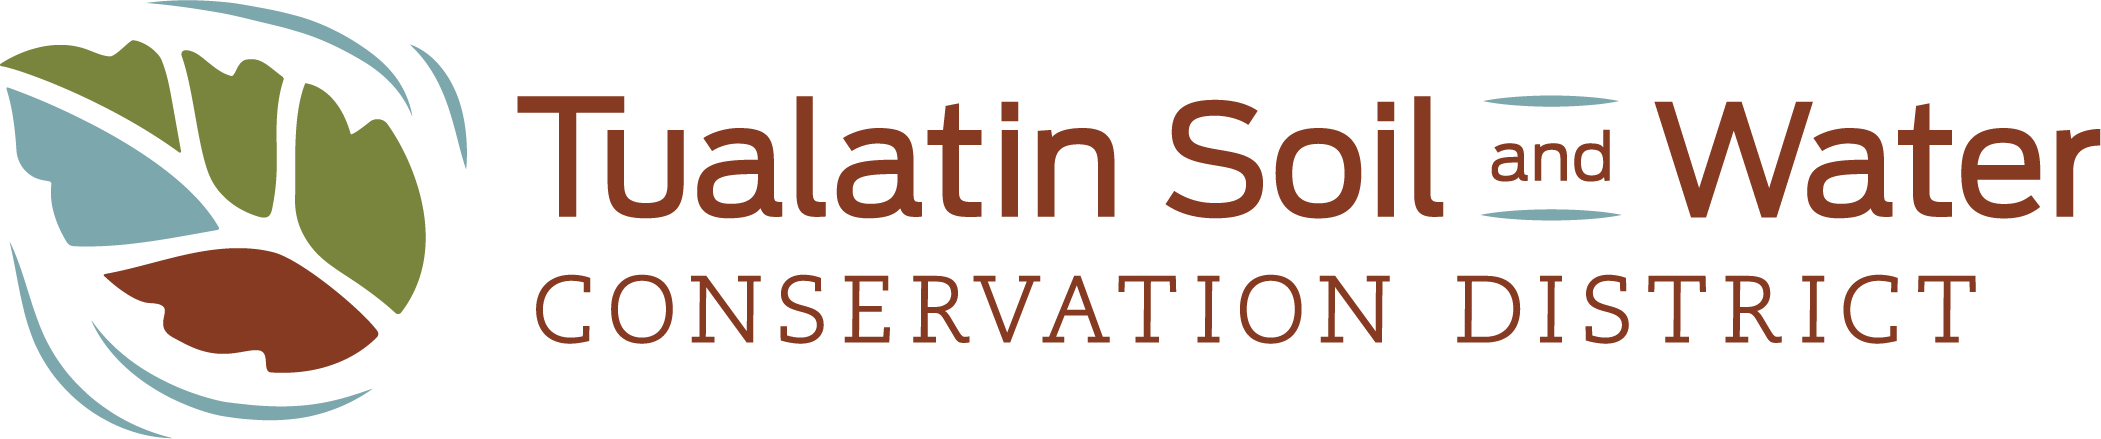 Tualatin Soil and Water Conservation District Logo